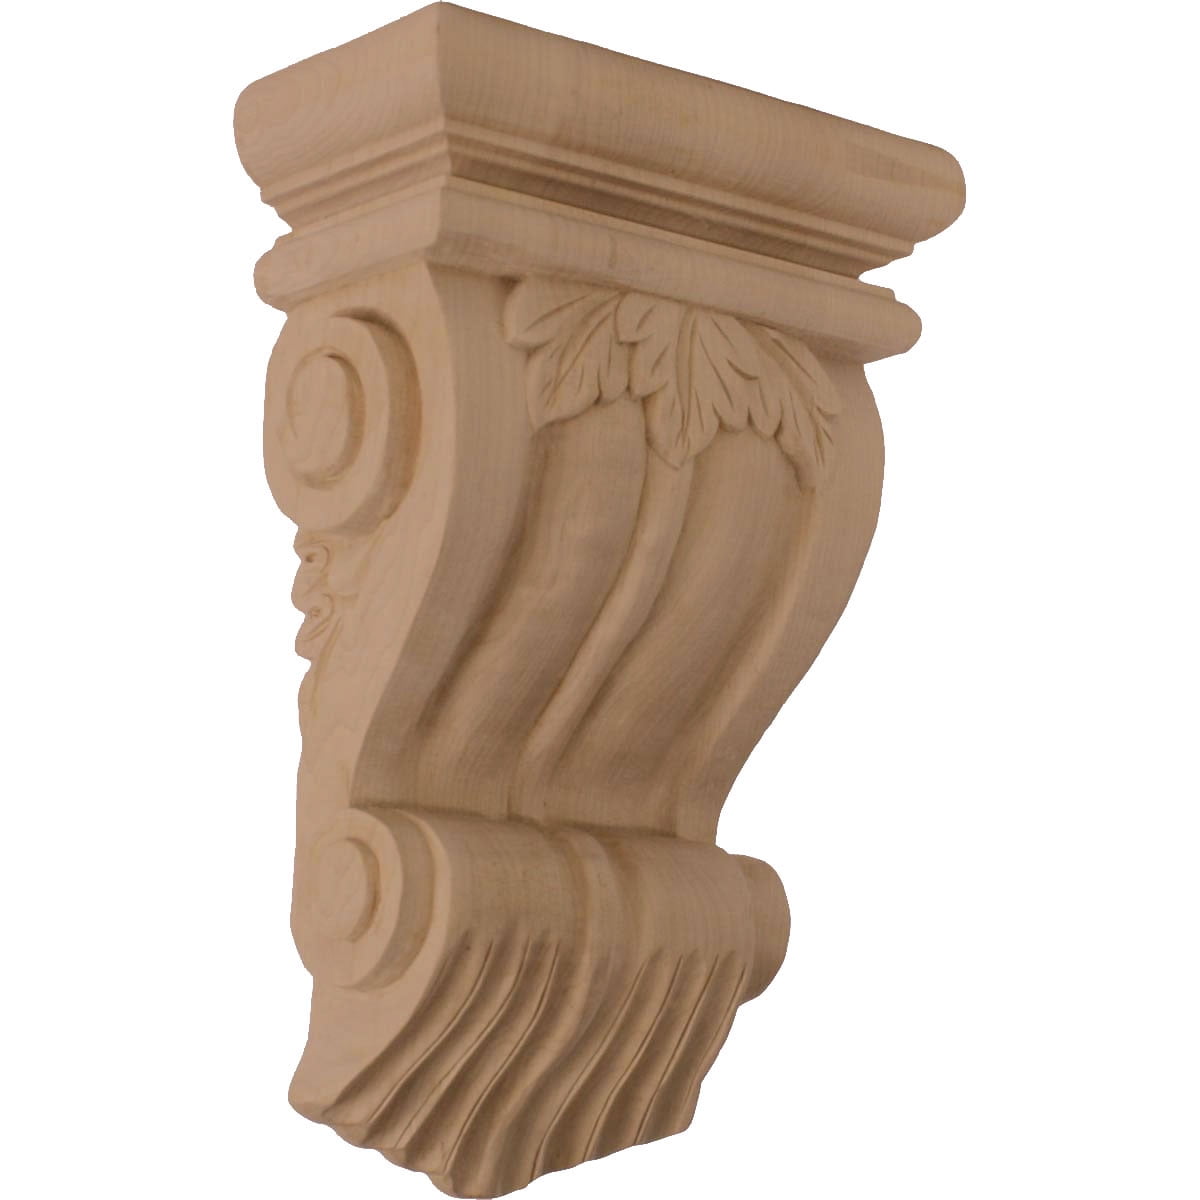 7"H 5"H Linden Wood Traditional Corbel Onlay Hand Carved Red Oak 